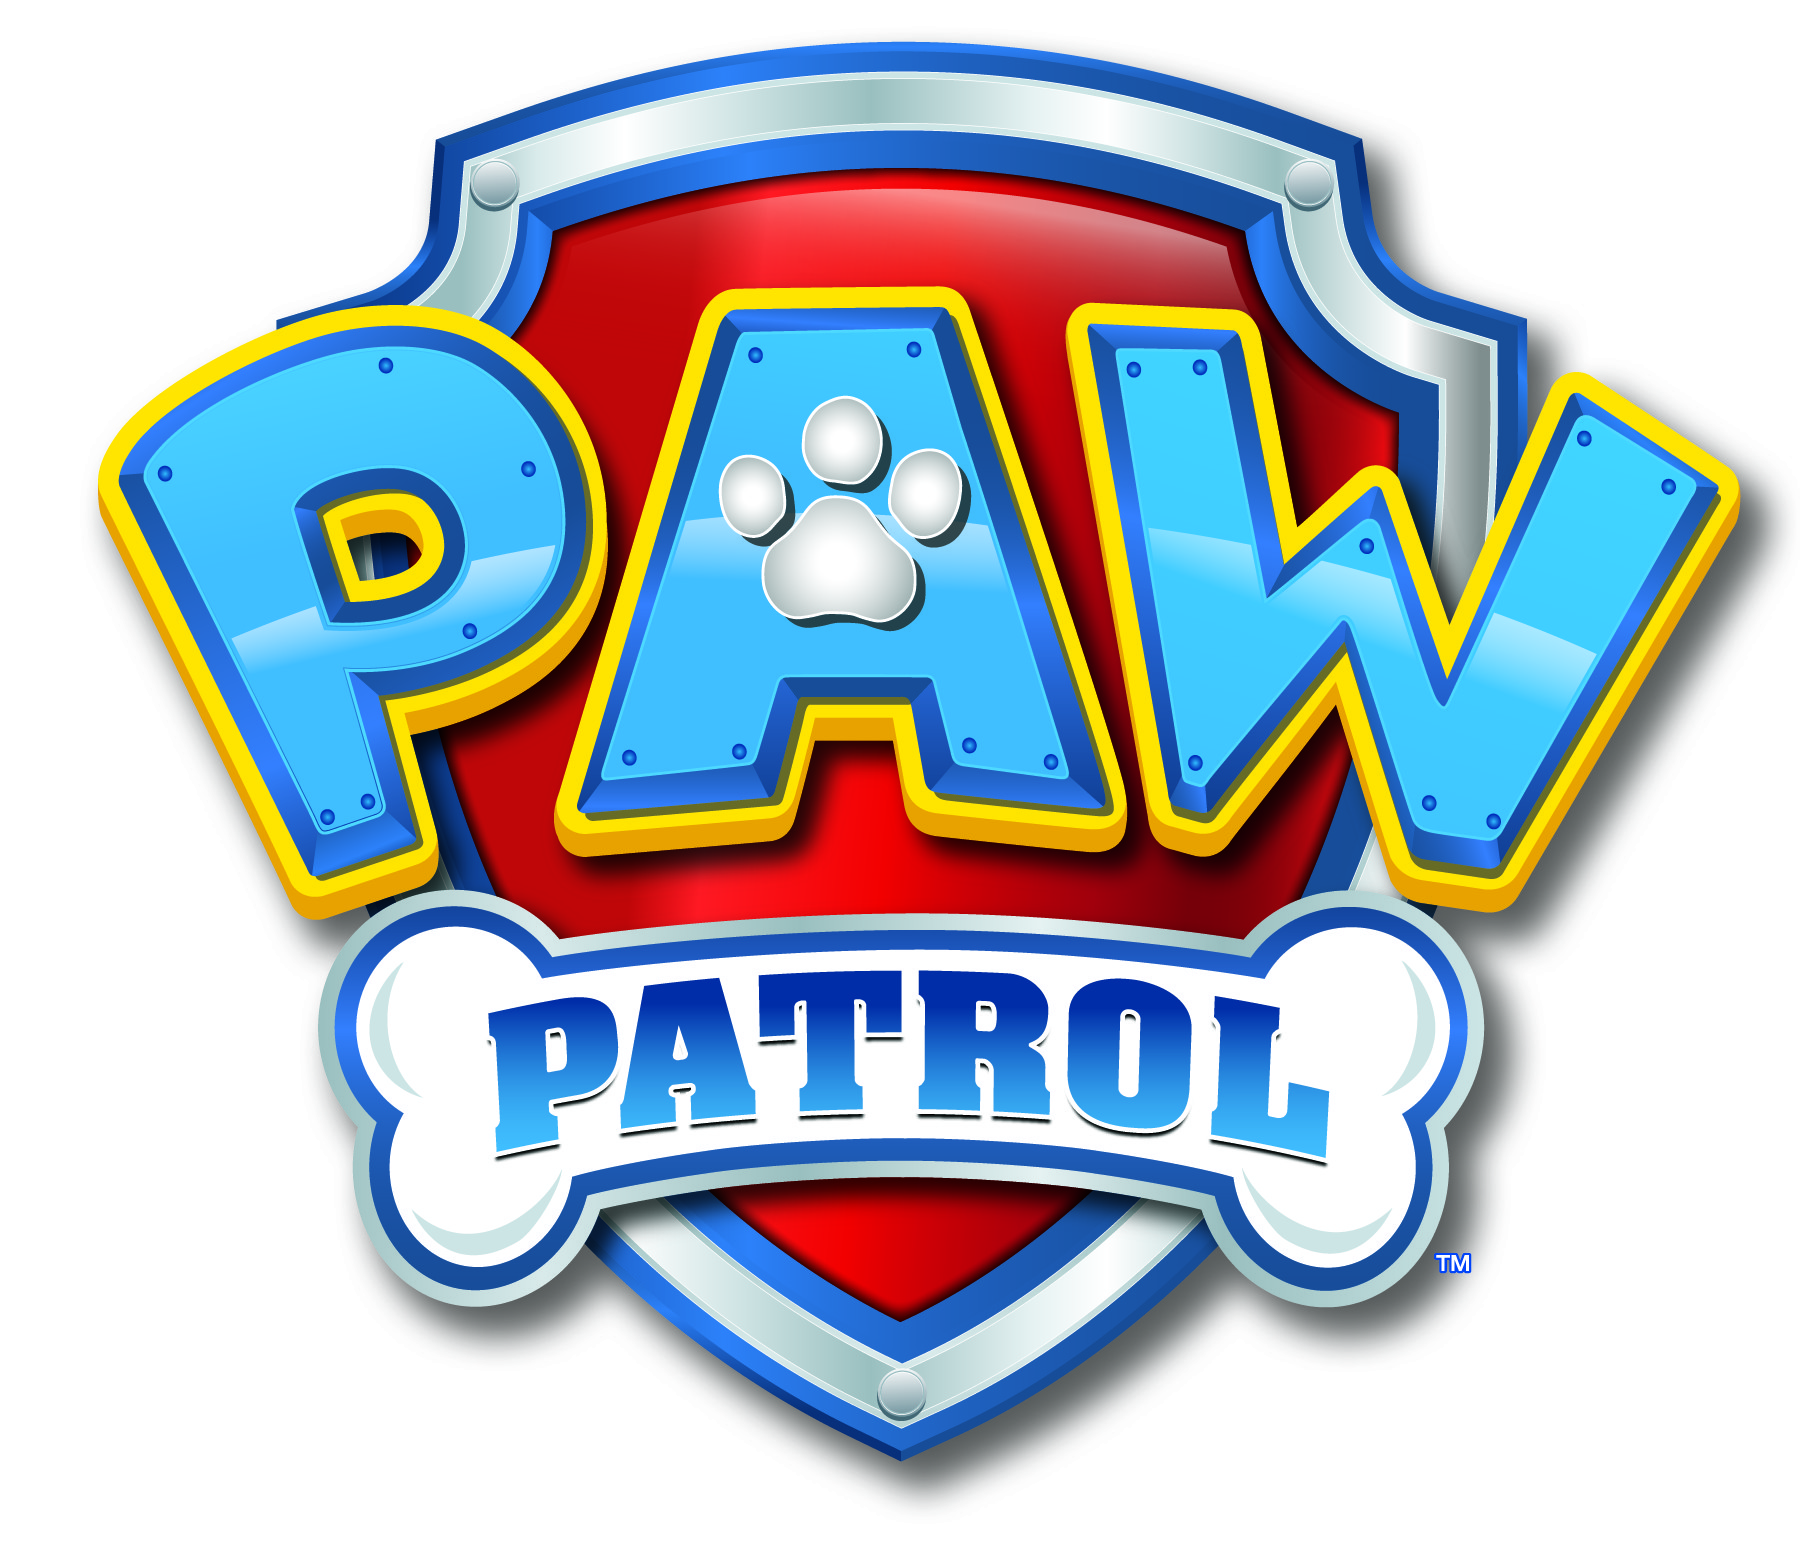 Paw patrol logo clipart abeoncliparts cliparts  jpg